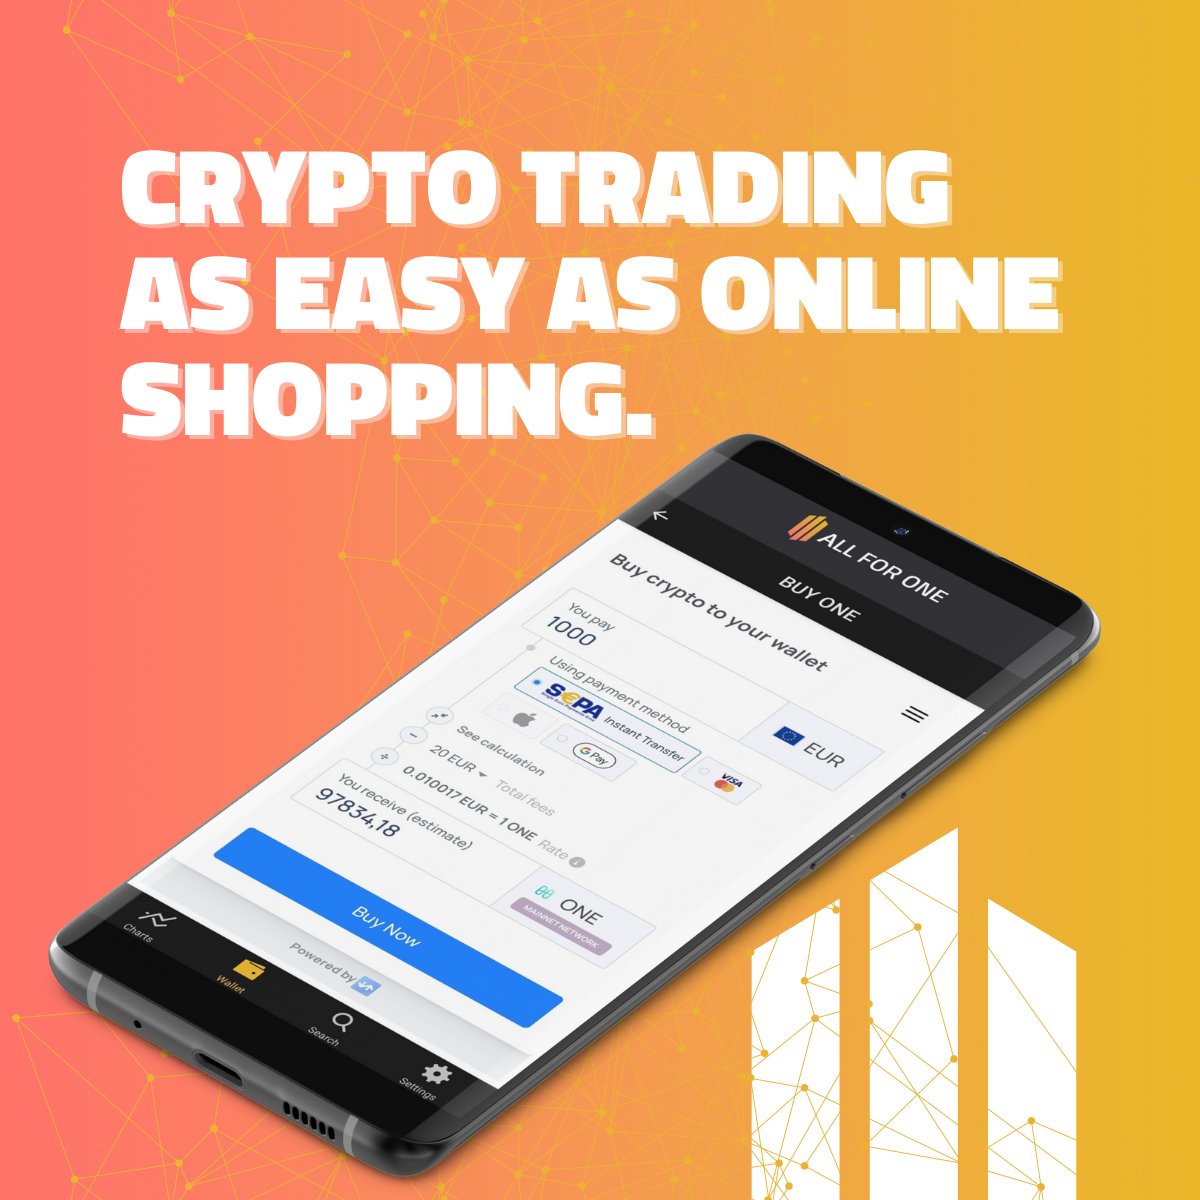 With AllForOne, purchasing coins is simple and convenient. Use your credit card or bank transfer to buy cryptocurrencies hassle-free. #crypto #buycoins